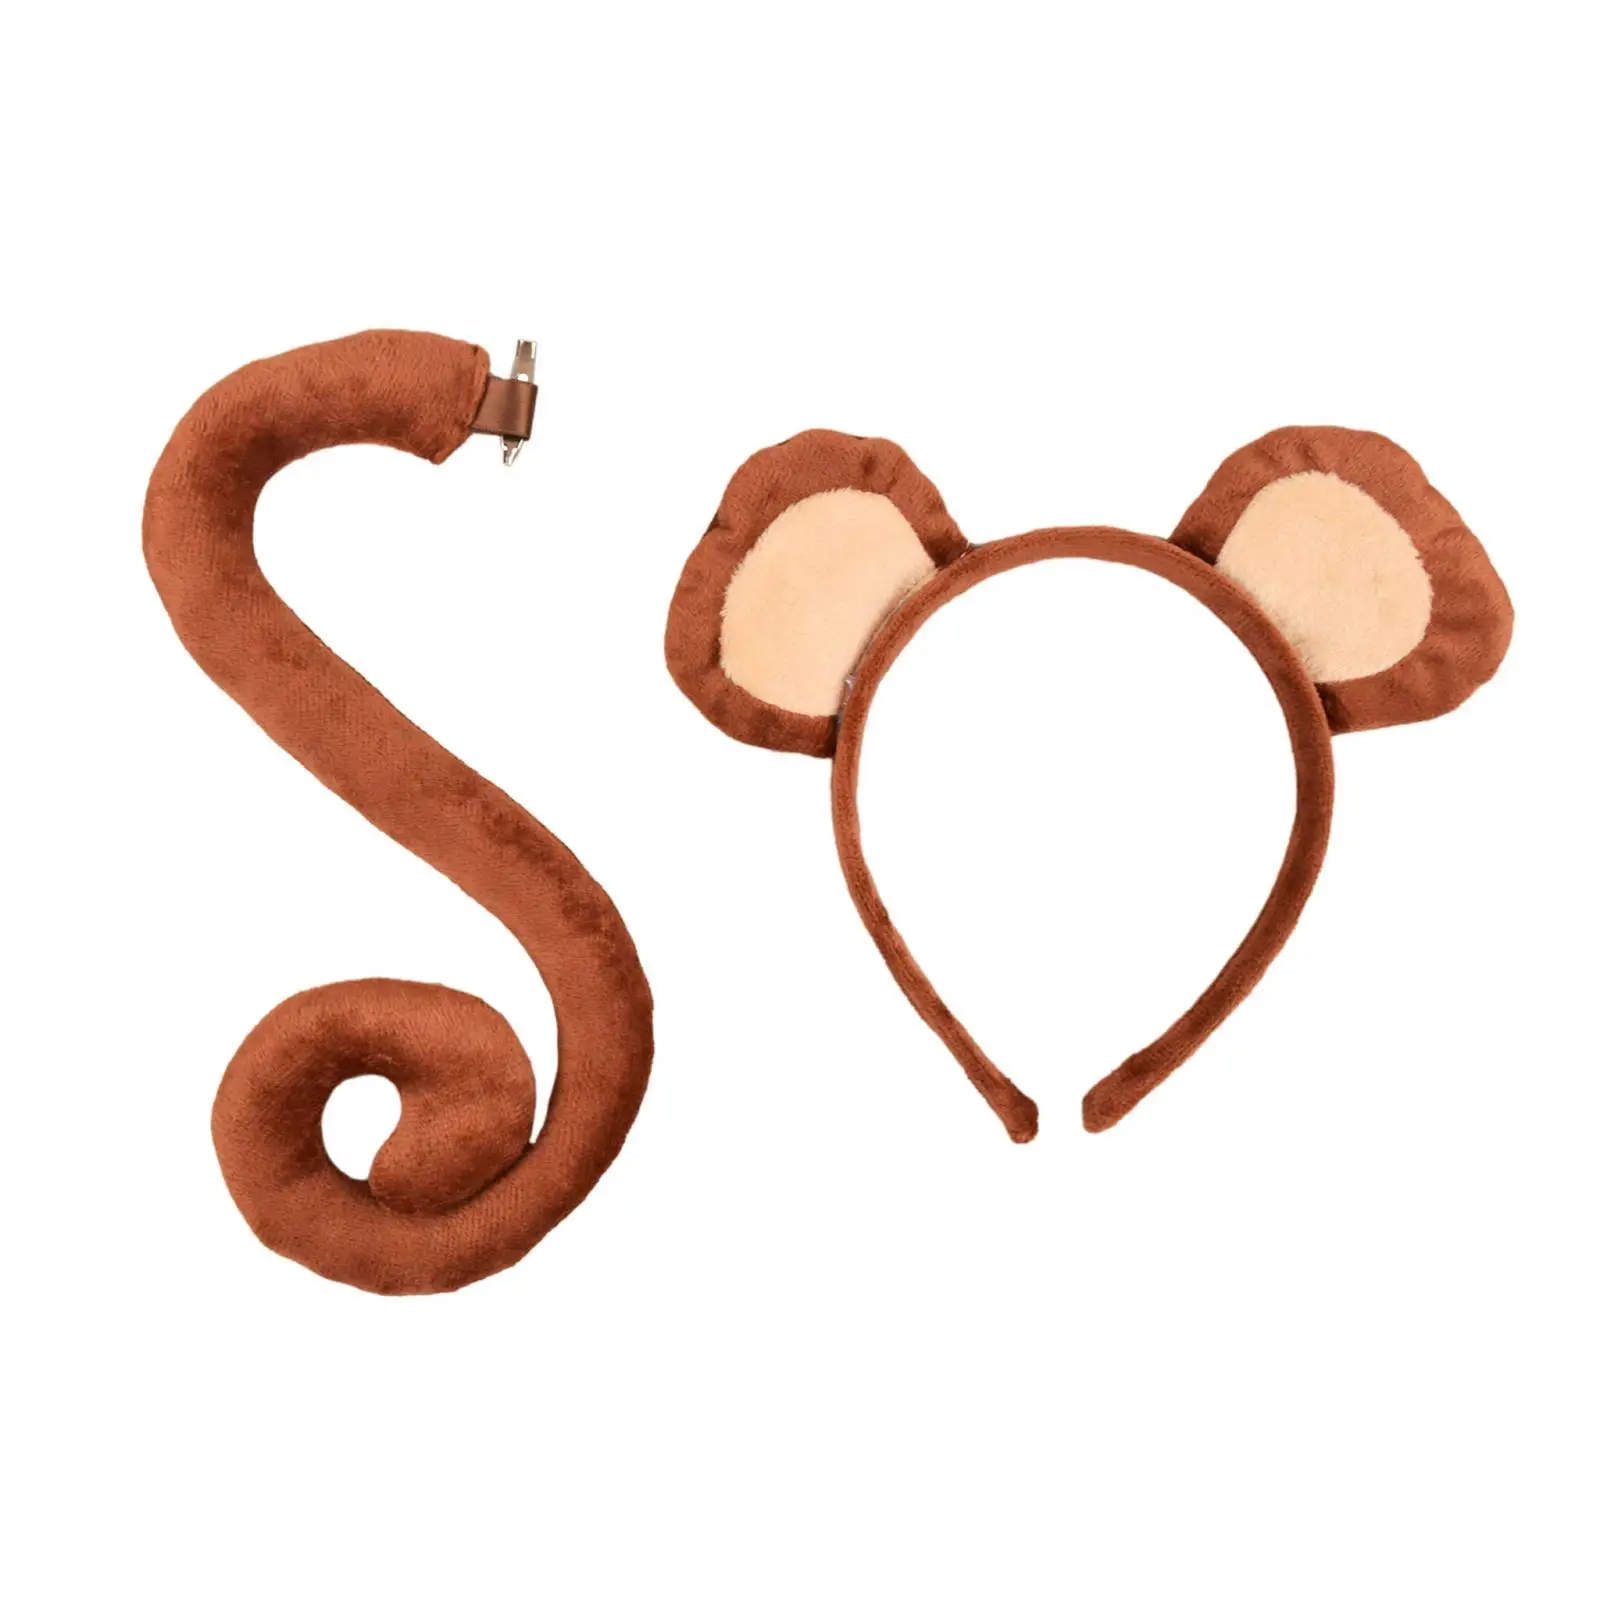 Monkey Ears and Tail Set Monkey Hair Hoop for Halloween Masquerade Holiday